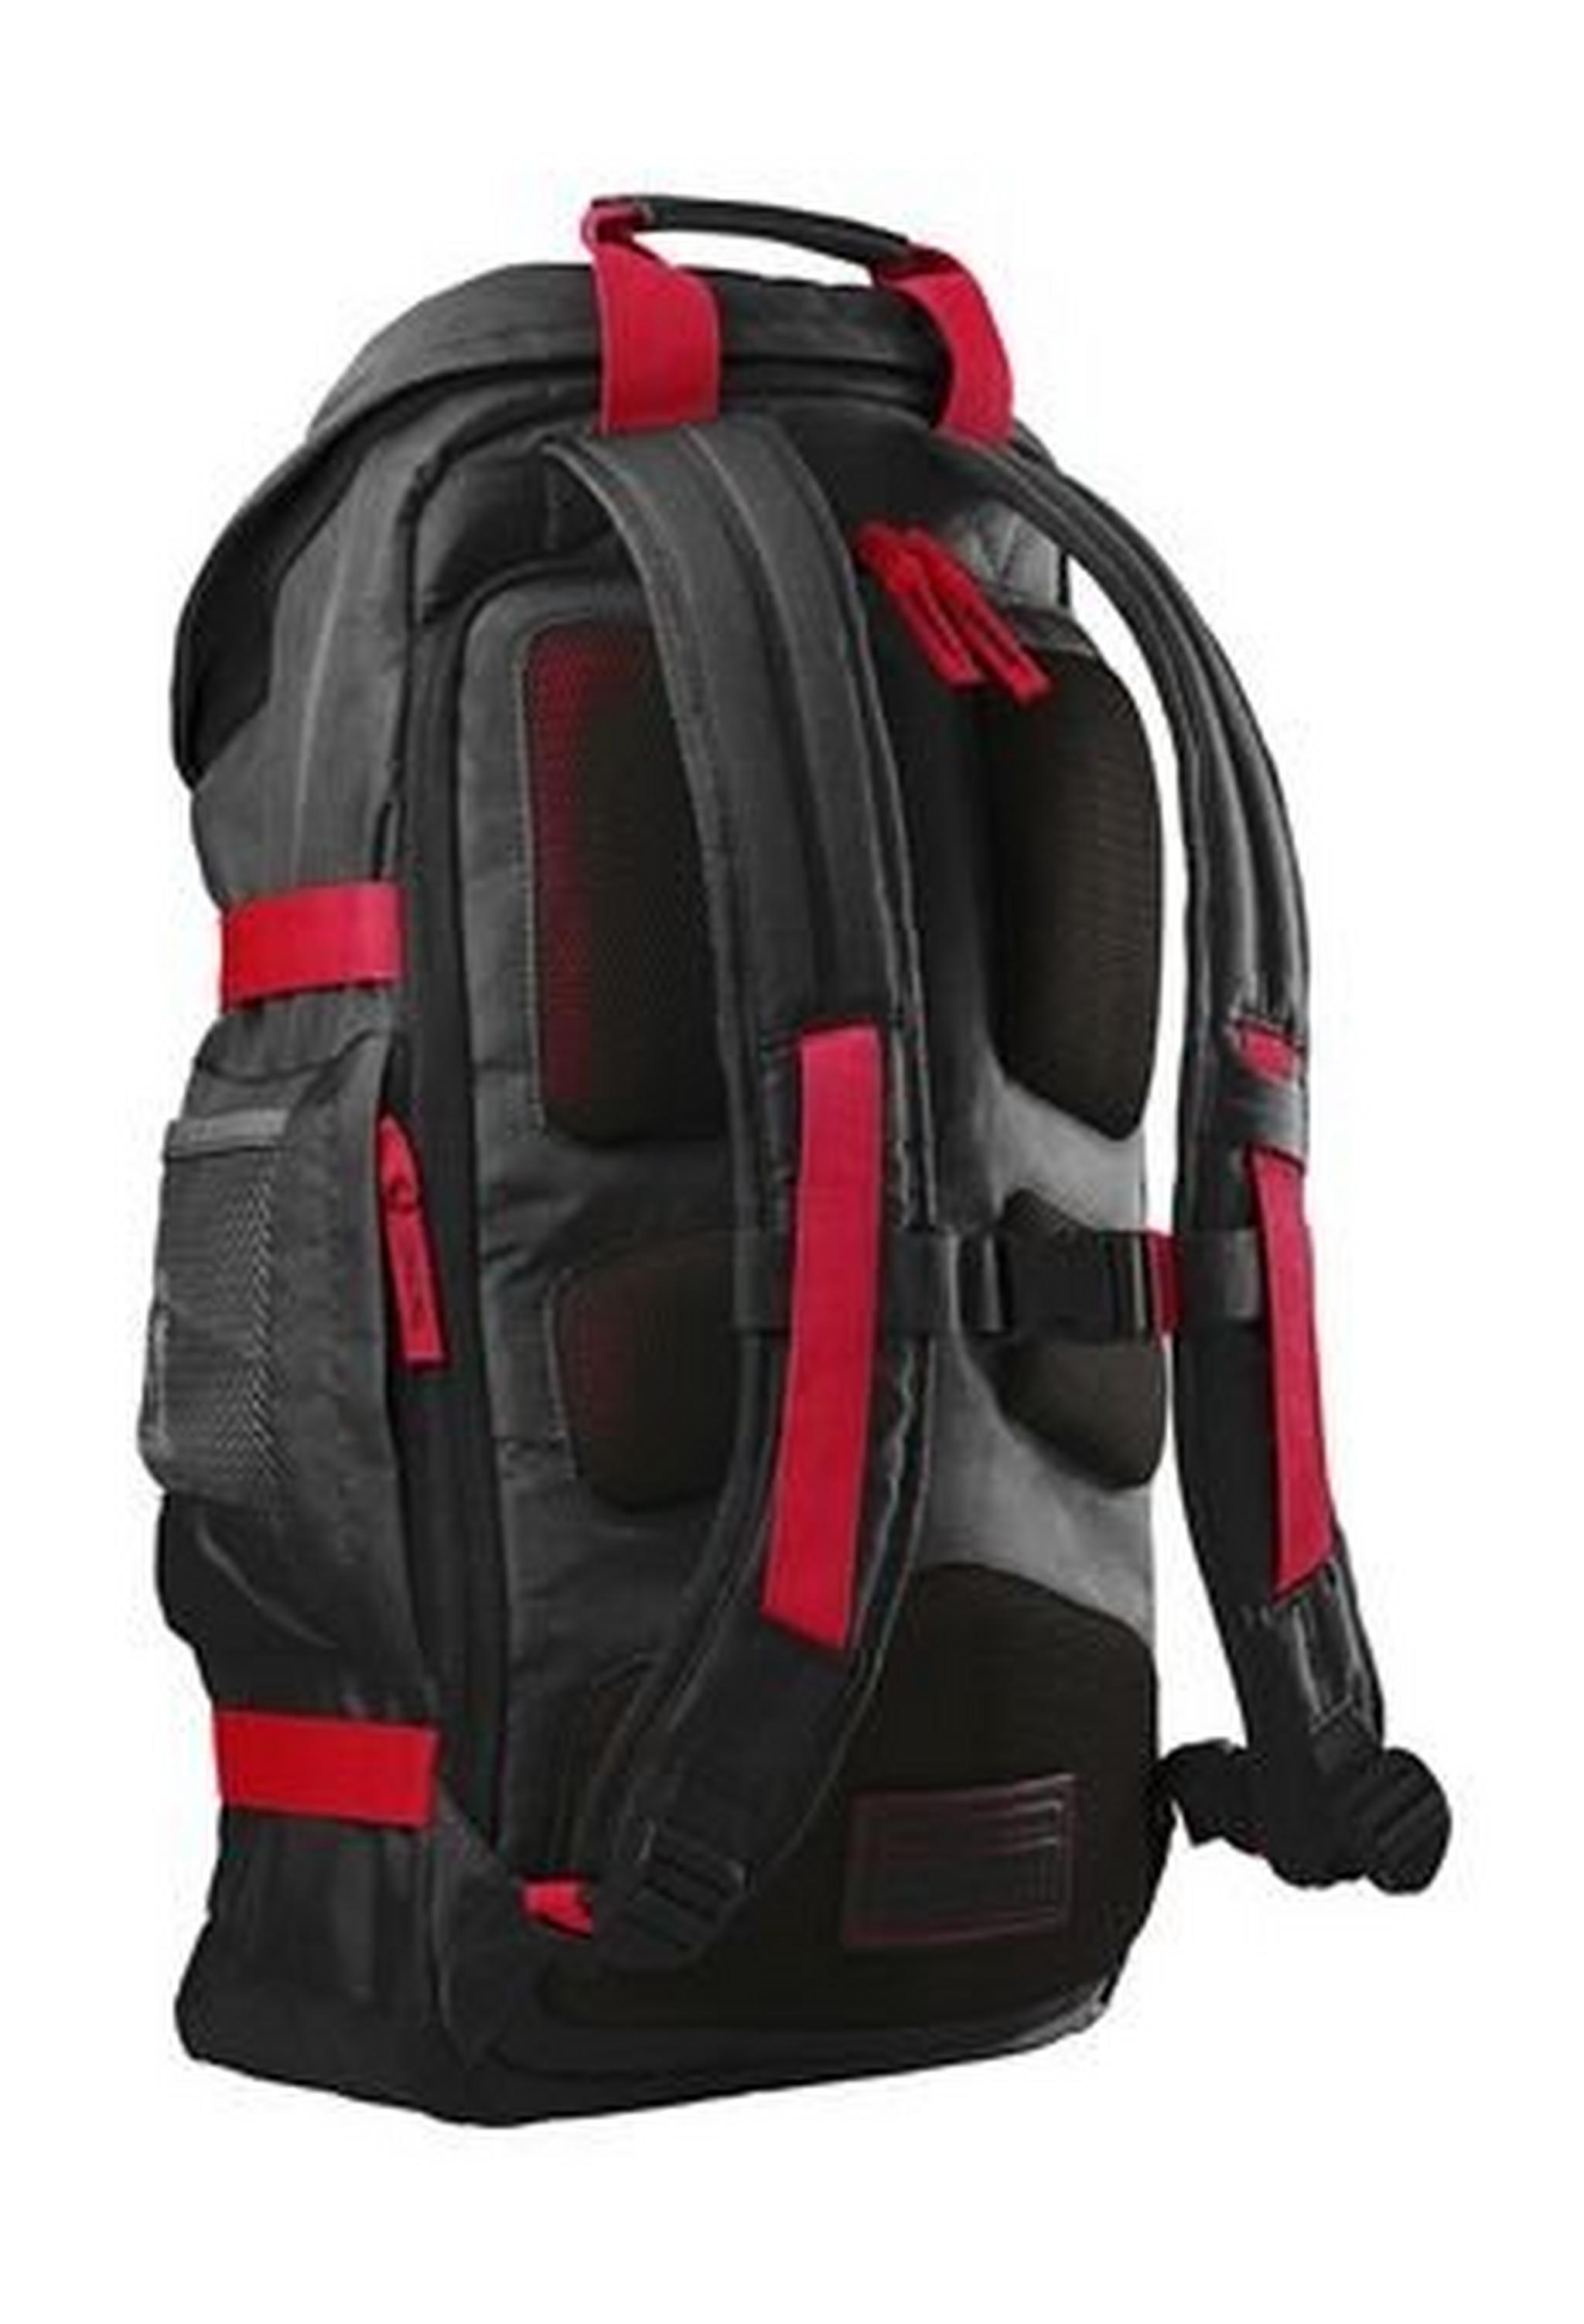 HP 15.6-inch Odyssey Backpack (X0R83AA) - Red/Black